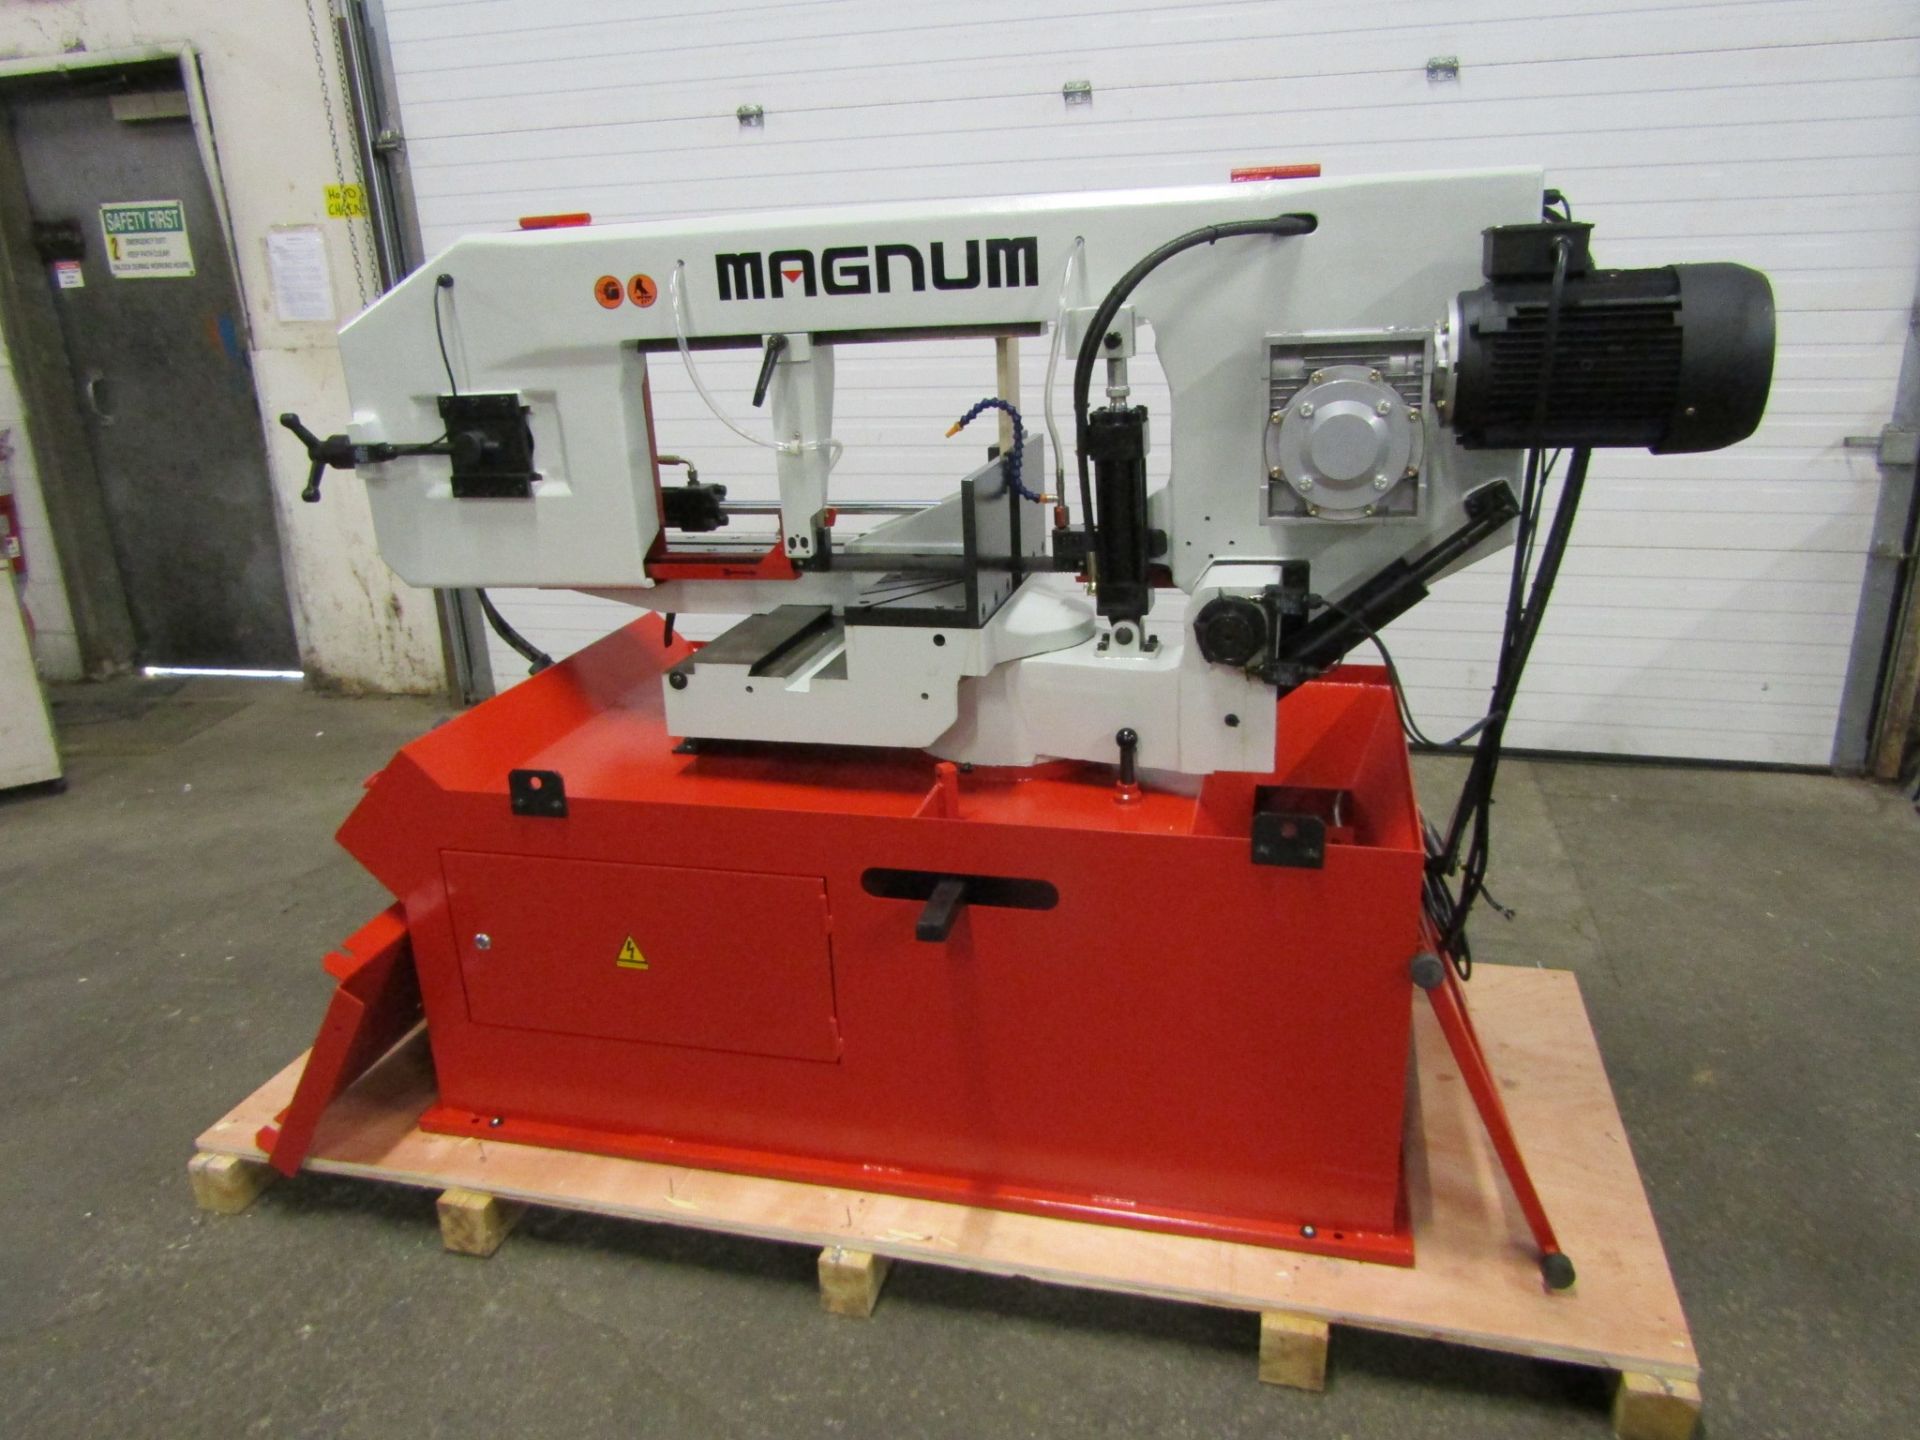 Magnum BSM-1813 Mitering Horizontal Band Saw - 18 X 13 inch CUTTING CAPACITY - CNC capability with